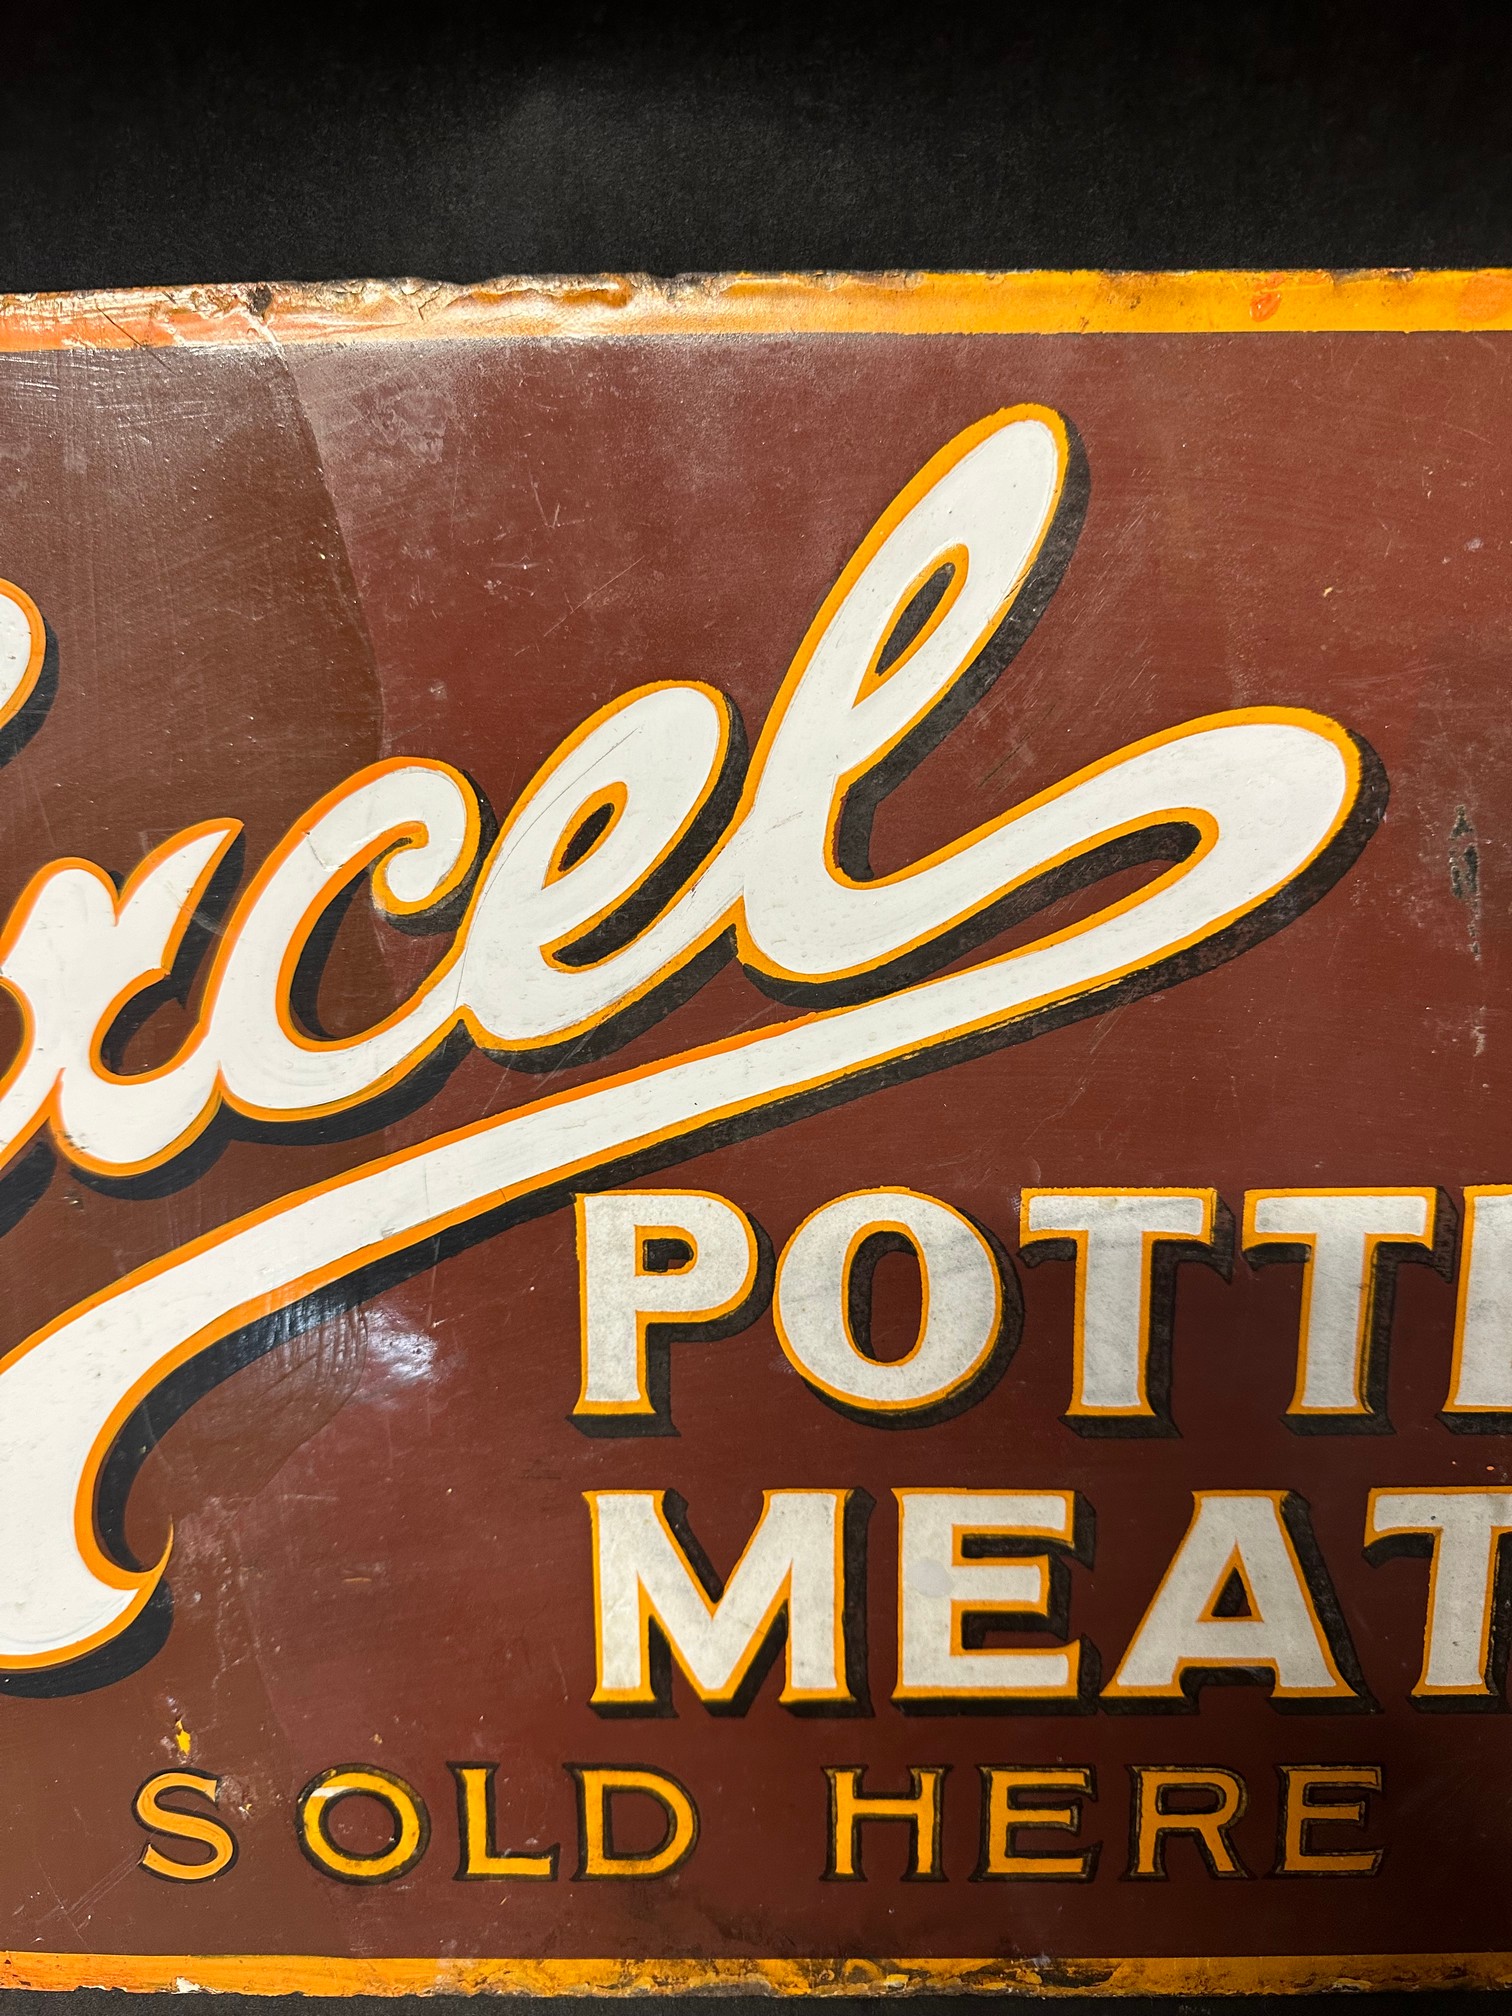 An Excel Potted Meats 'Sold Here' double sided enamel advertising sign with hanging flange, - Image 7 of 8